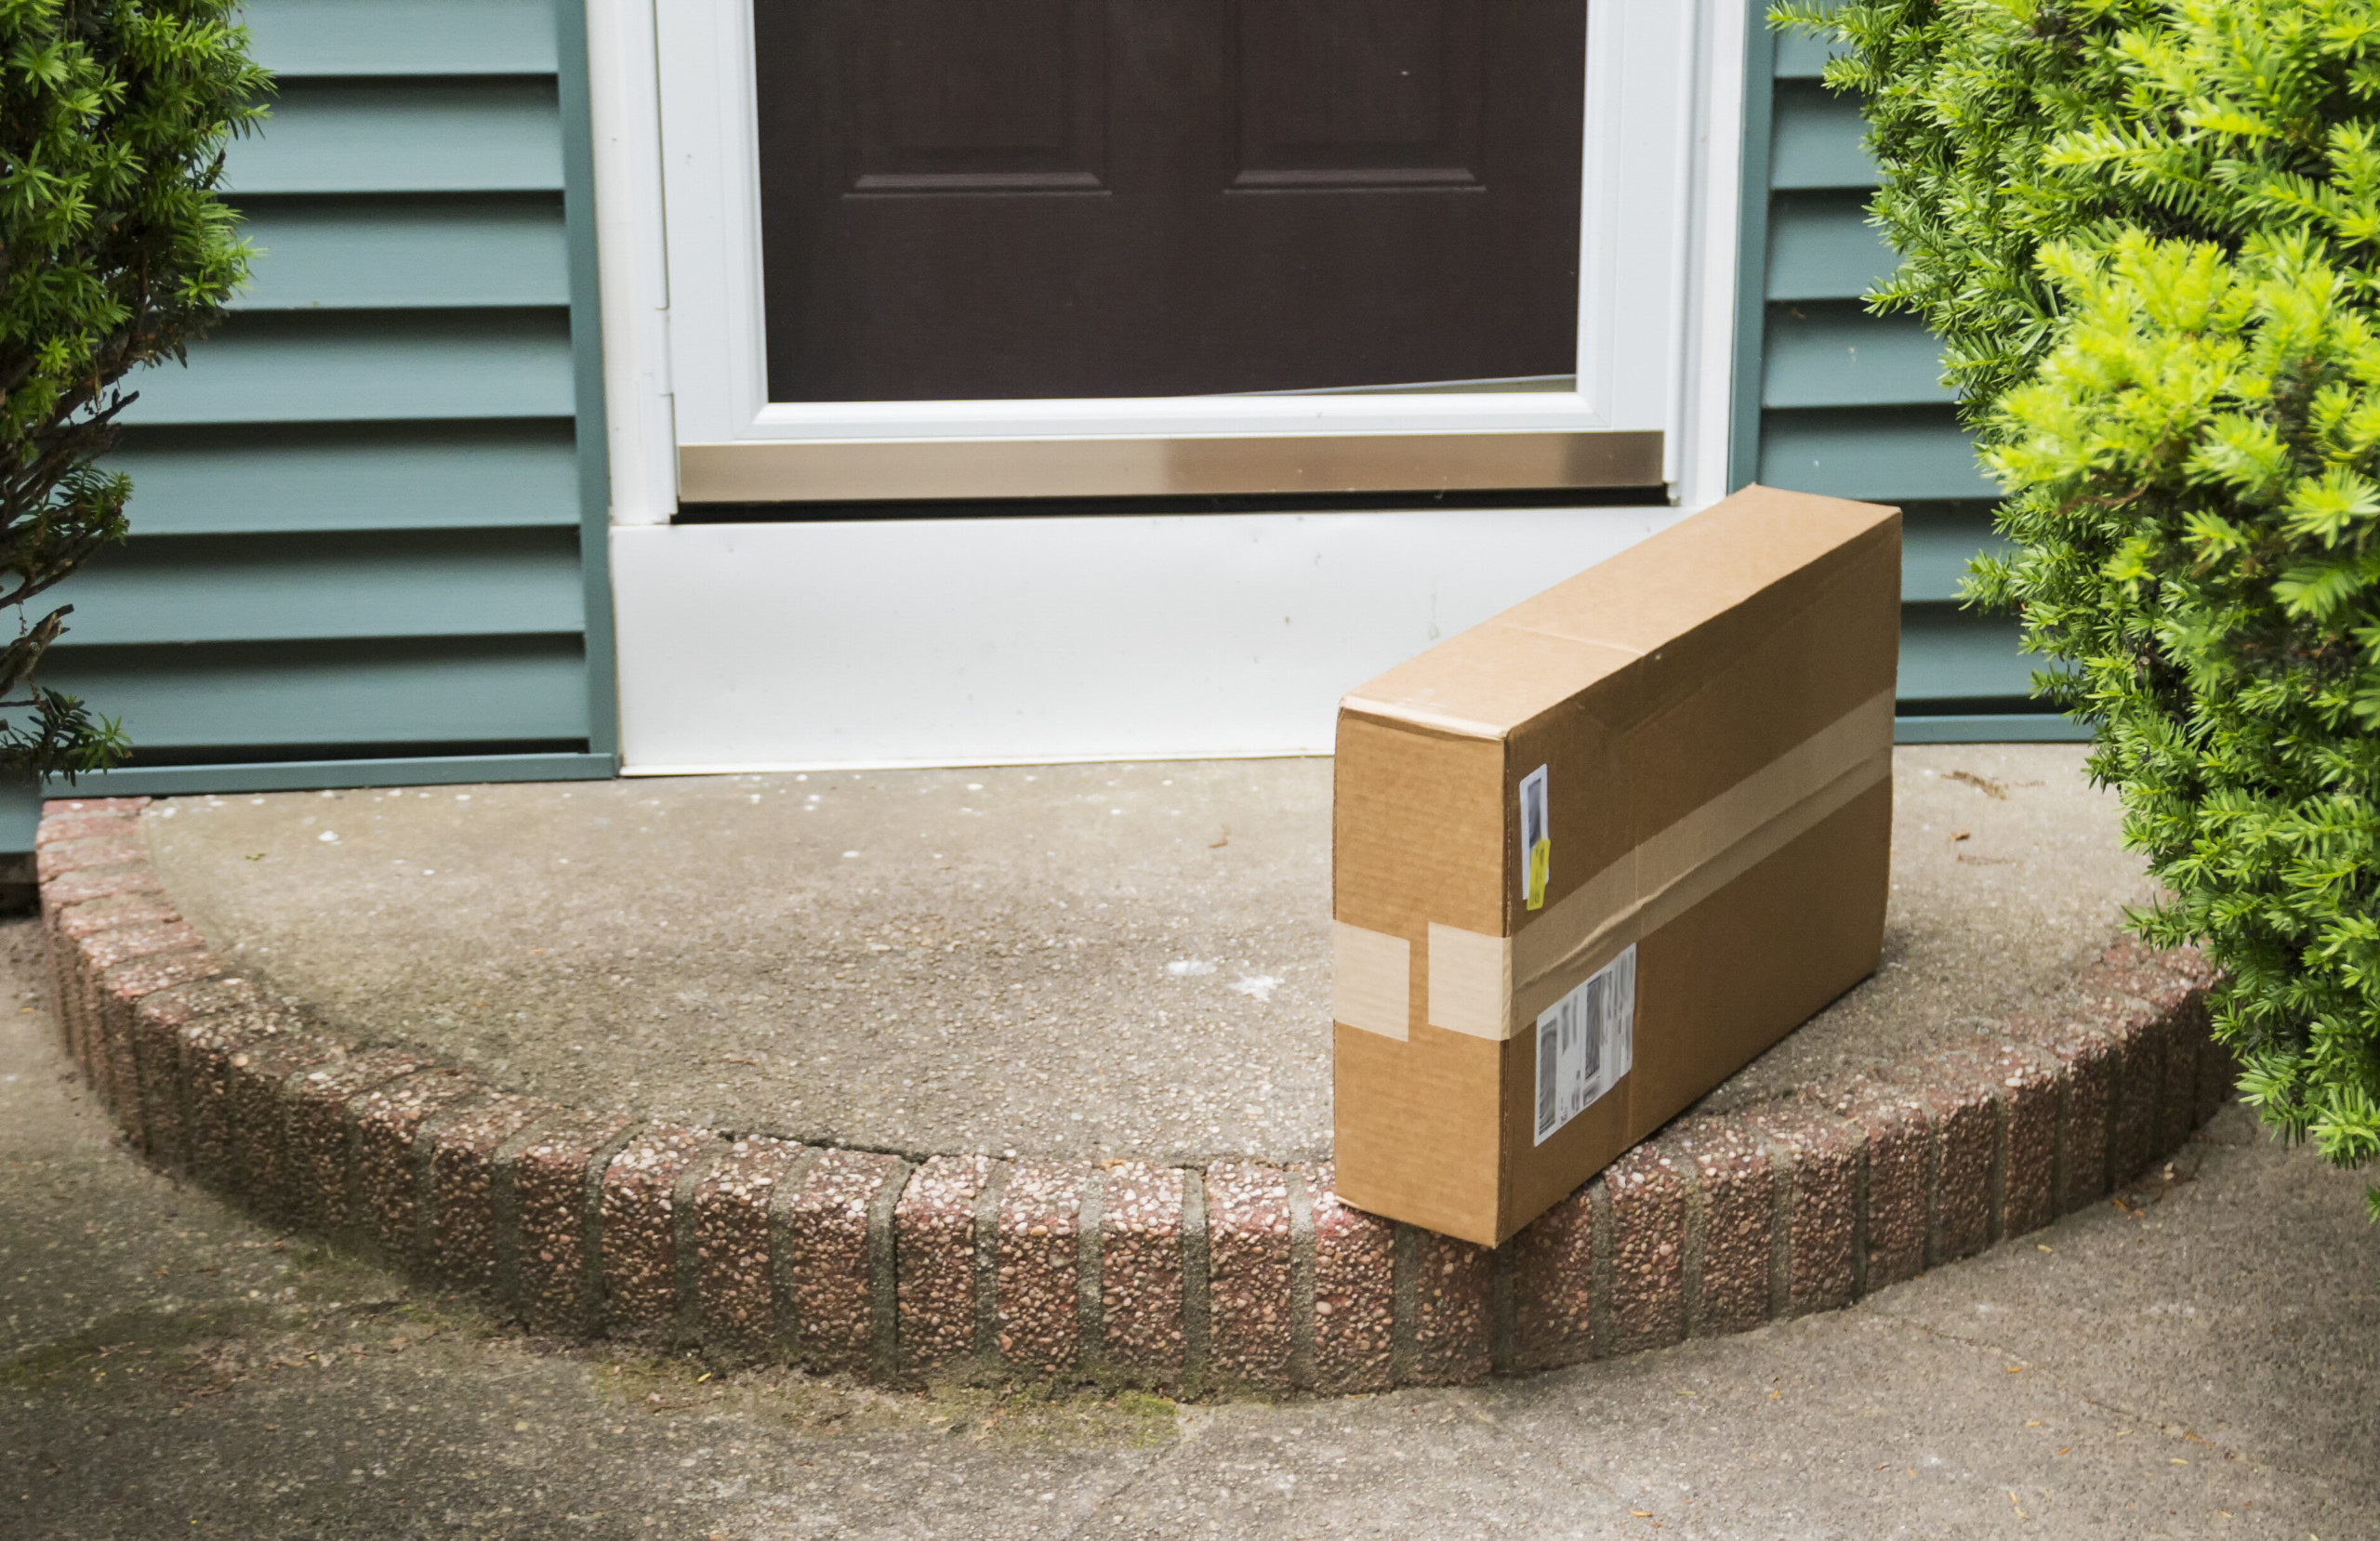 Porch Pirates stealing treasures in Saugeen Shores